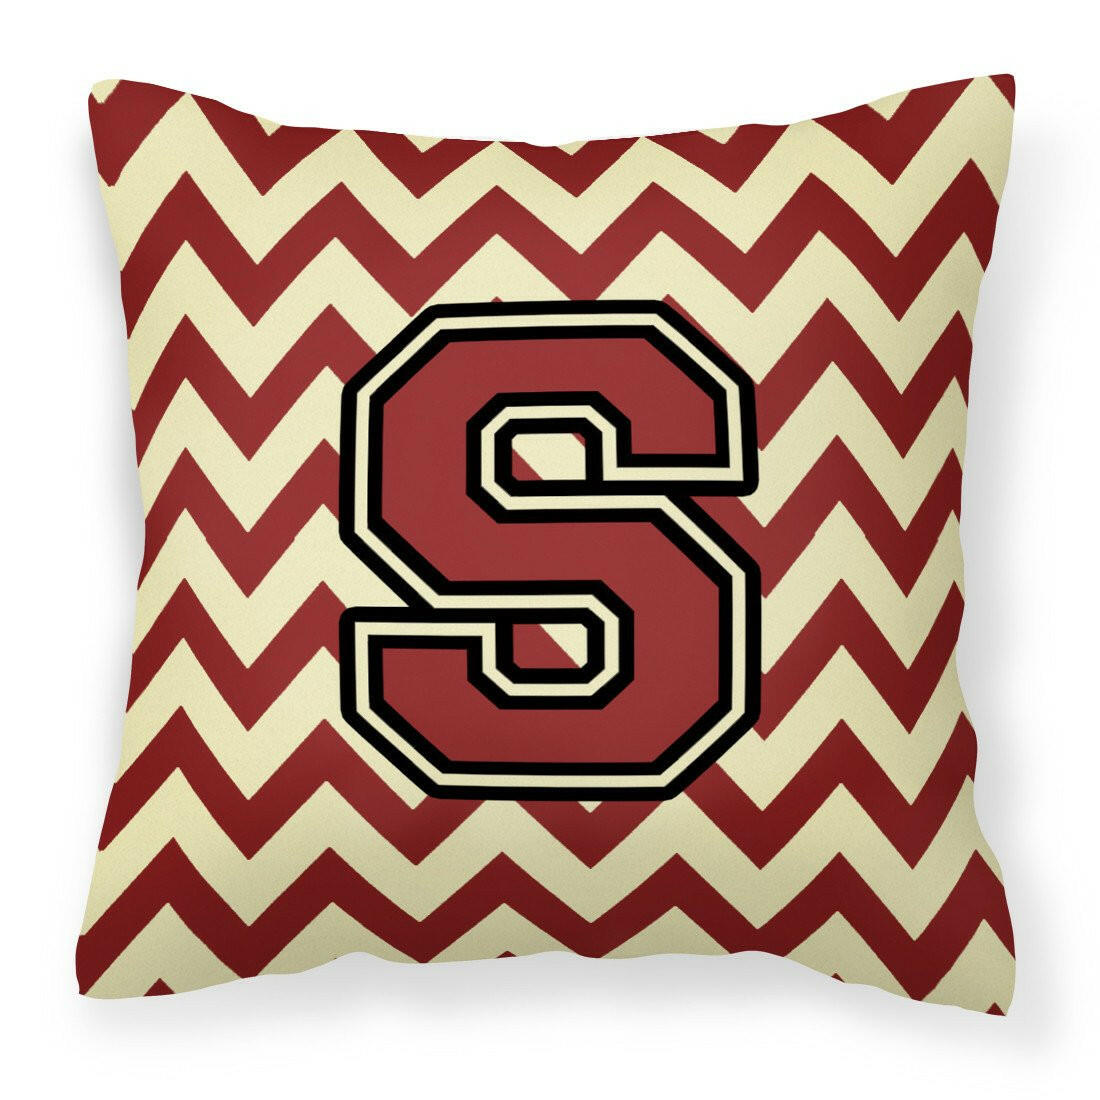 Letter S Chevron Maroon and Gold Fabric Decorative Pillow CJ1061-SPW1414 by Caroline's Treasures